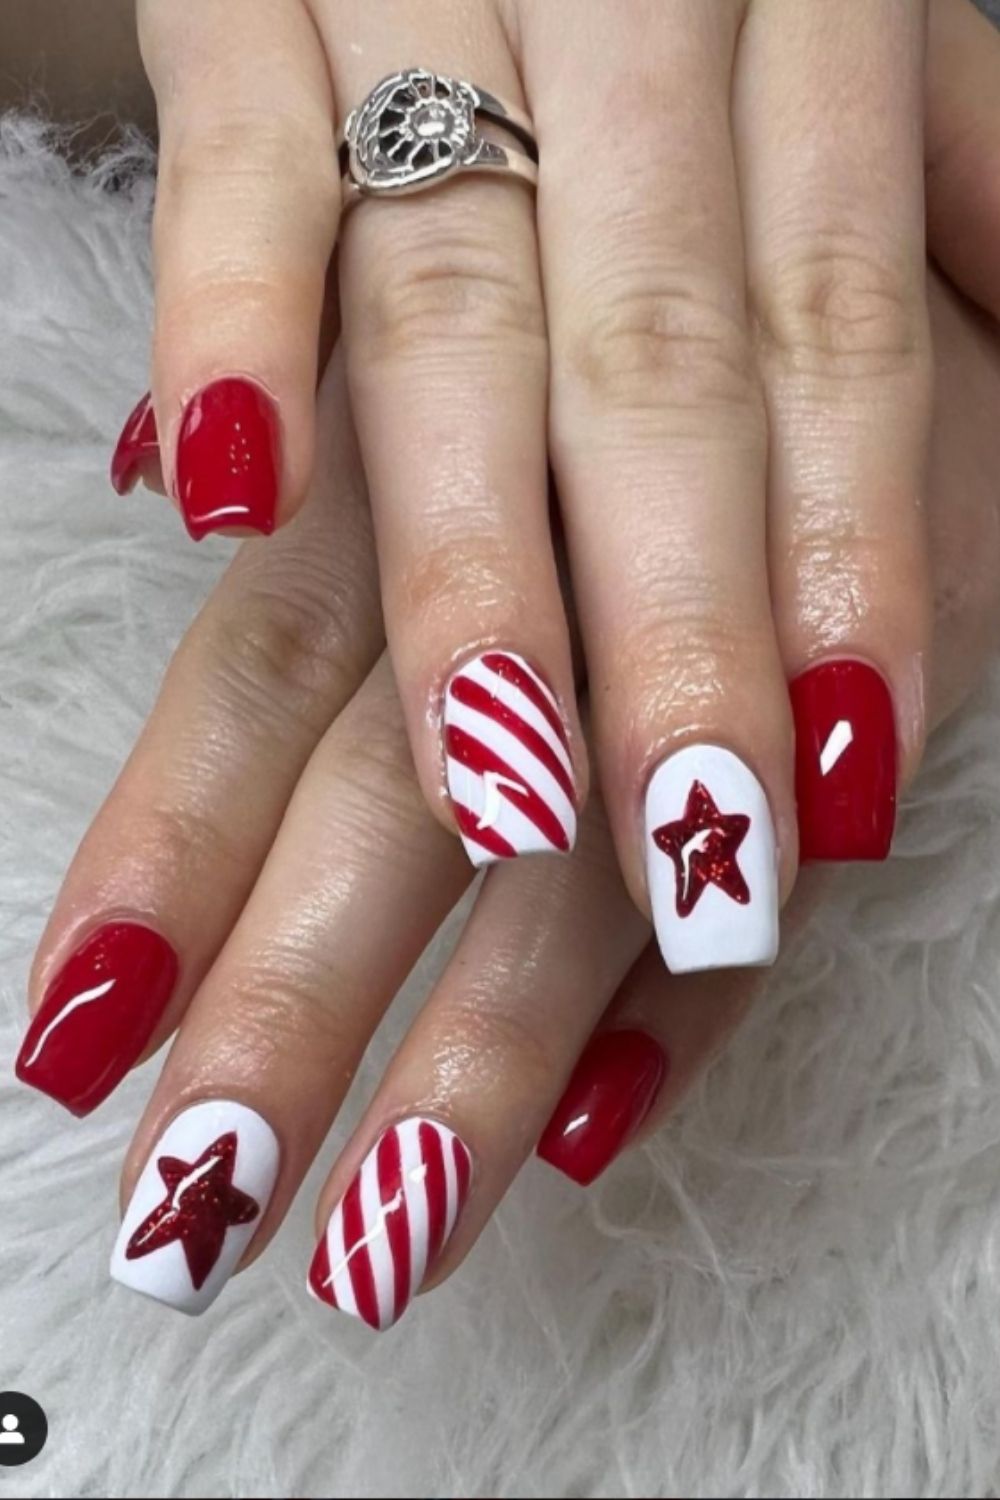 White and red nails with star